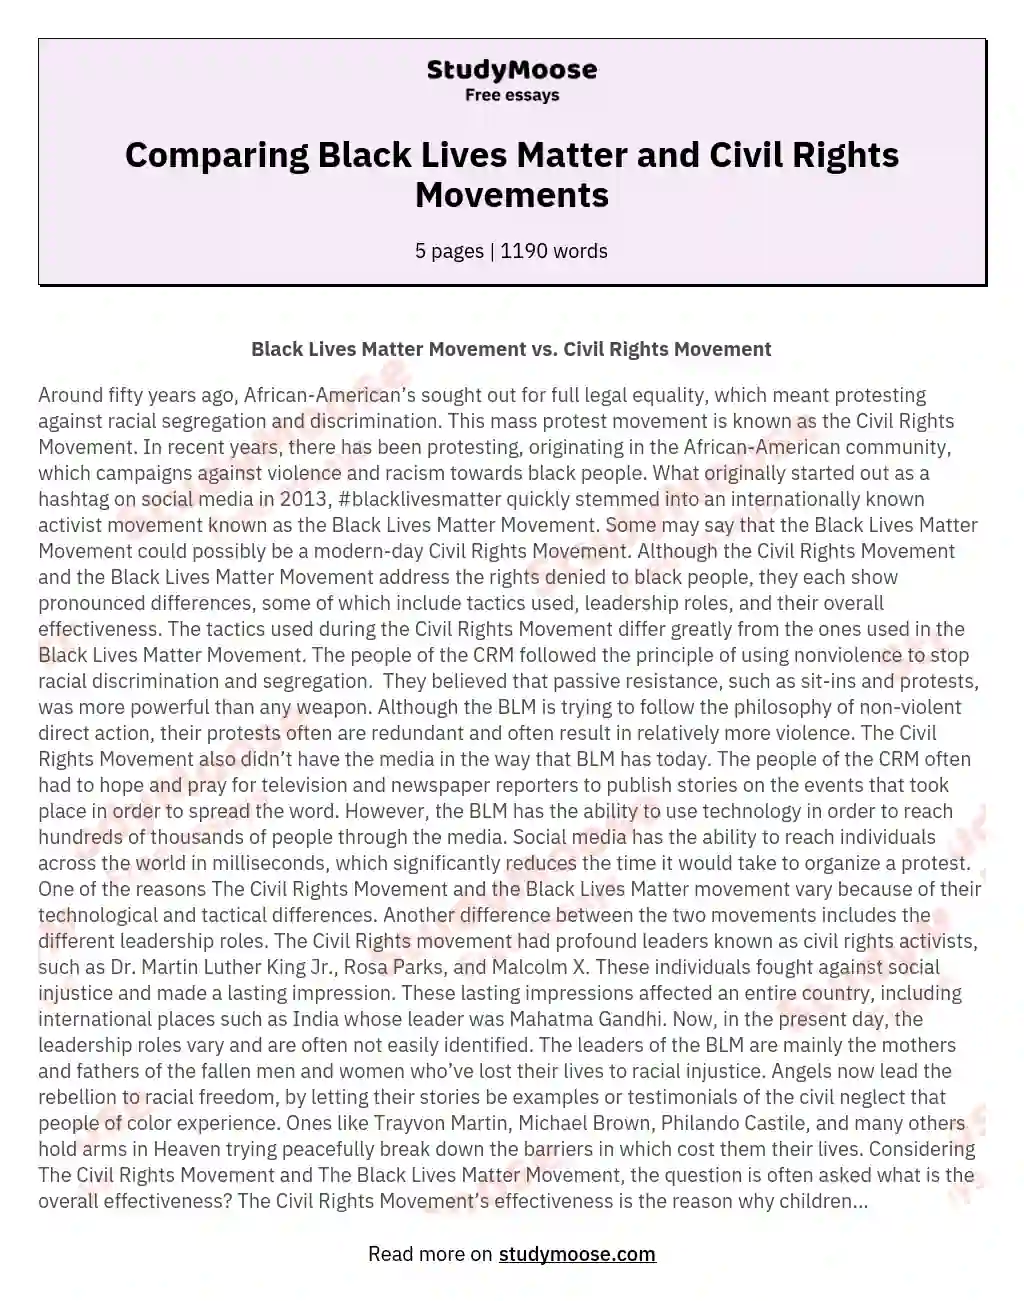 Comparing Black Lives Matter and Civil Rights Movements essay